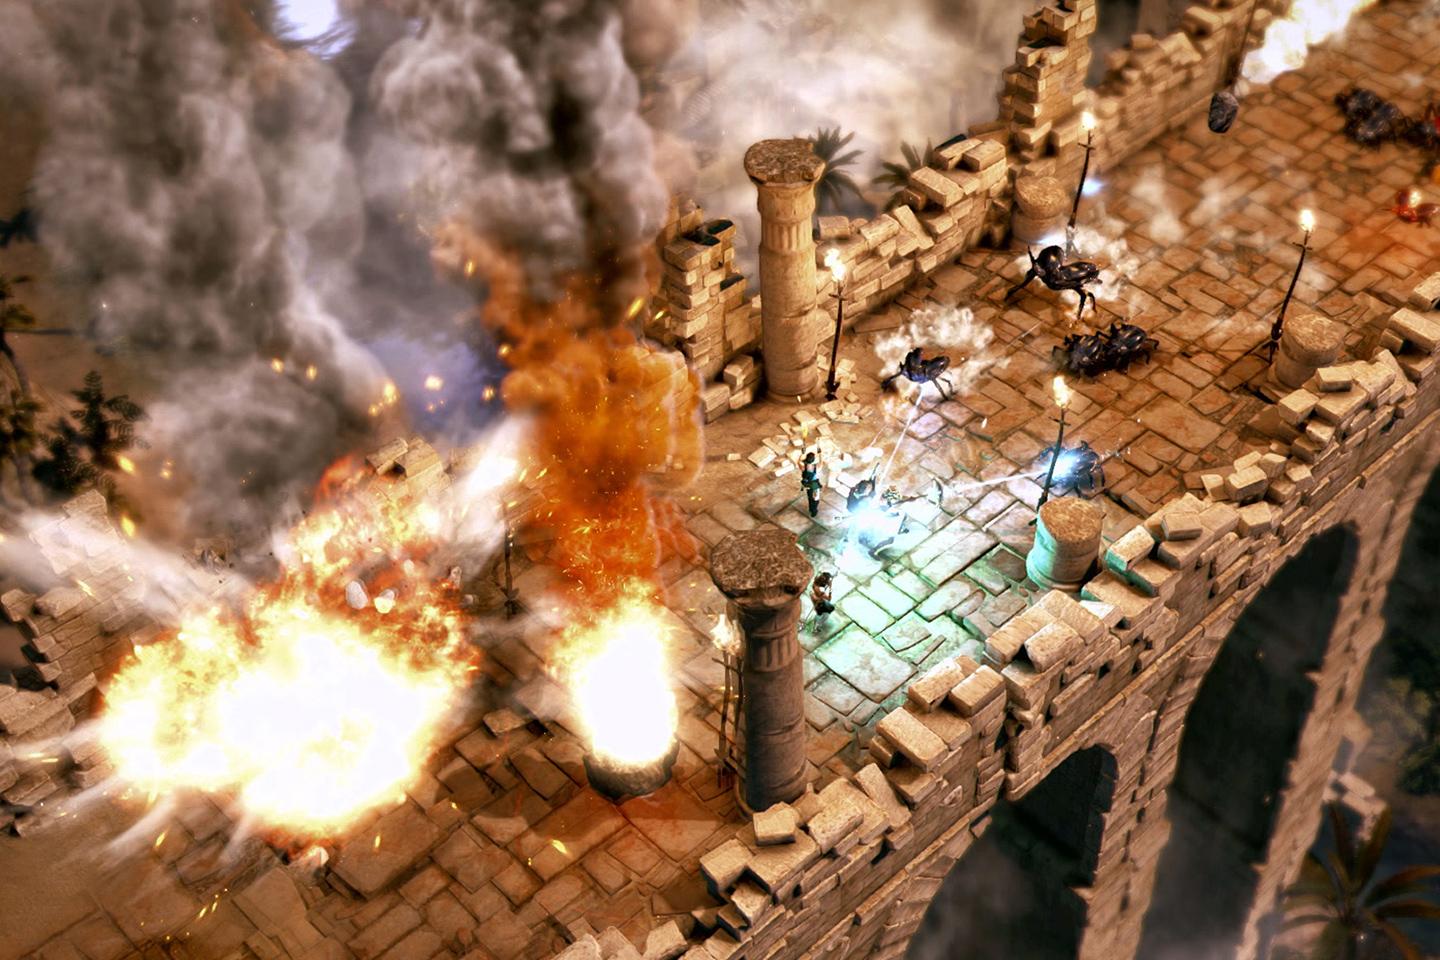 An intense battle scene from a Tomb Raider game on a stone bridge with characters dodging explosions and attacking skeletal warriors amidst crumbling ruins.